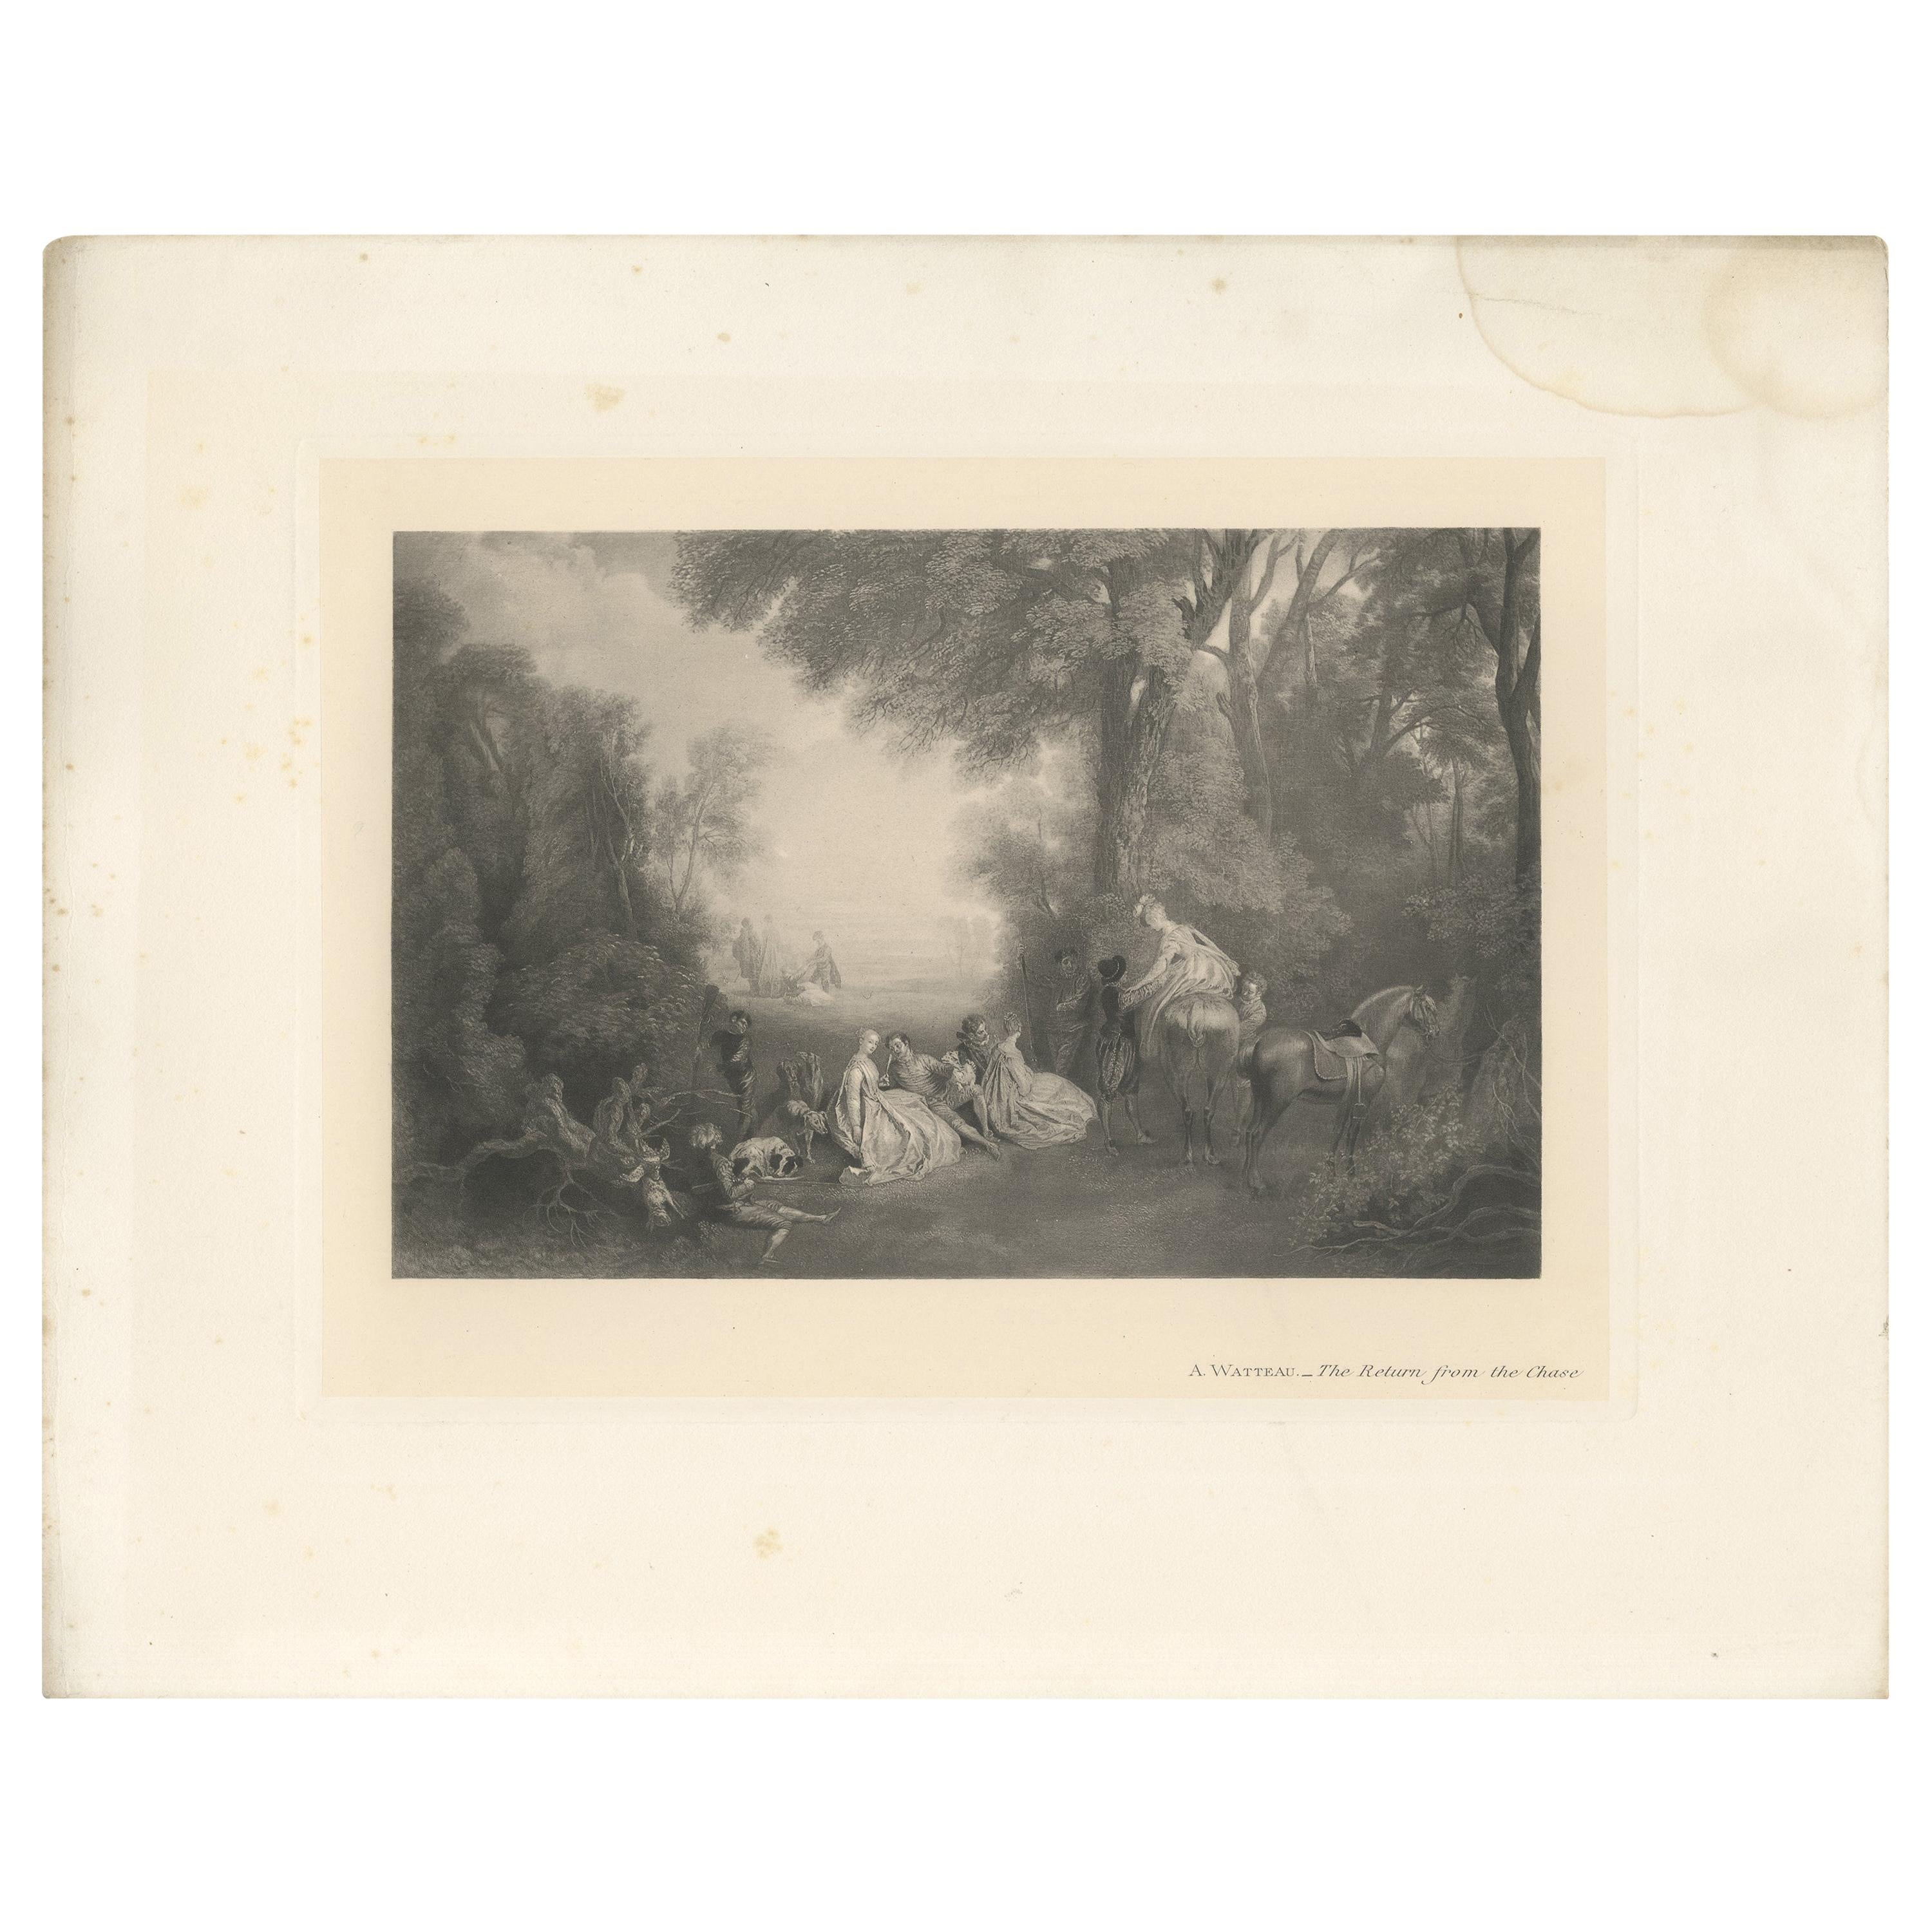 Antique Print of 'The Return from the Chase' Made After a. Watteau, 1902